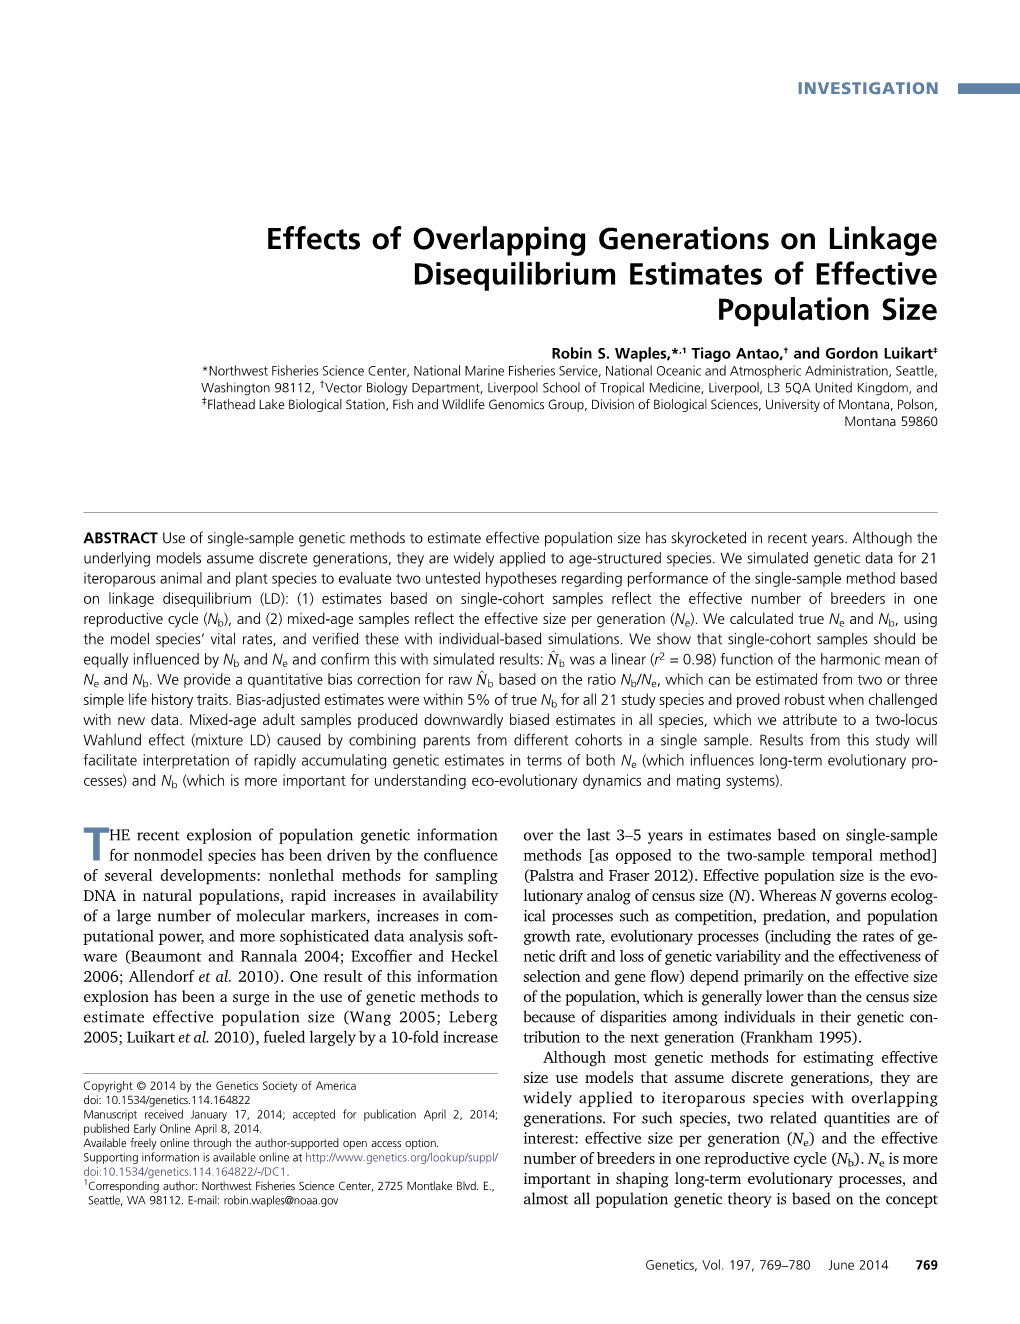 Effects of Overlapping Generations on Linkage Disequilibrium Estimates of Effective Population Size